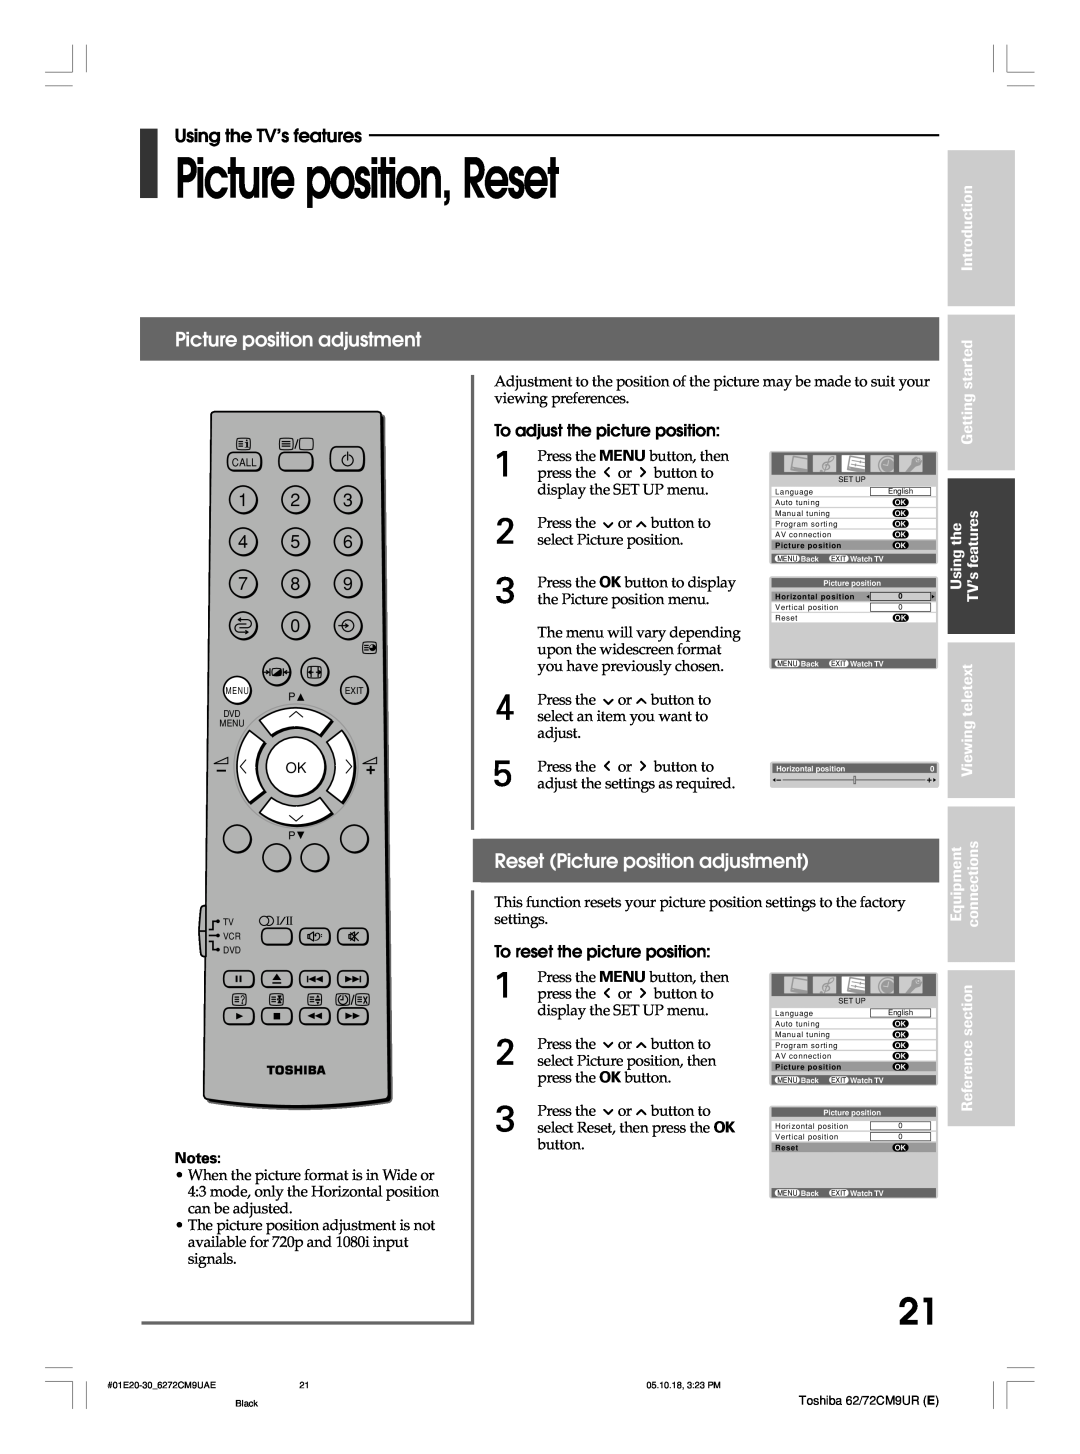 Toshiba 72CM9UE Picture position, Reset, Reset Picture position adjustment, To adjust the picture position, started 